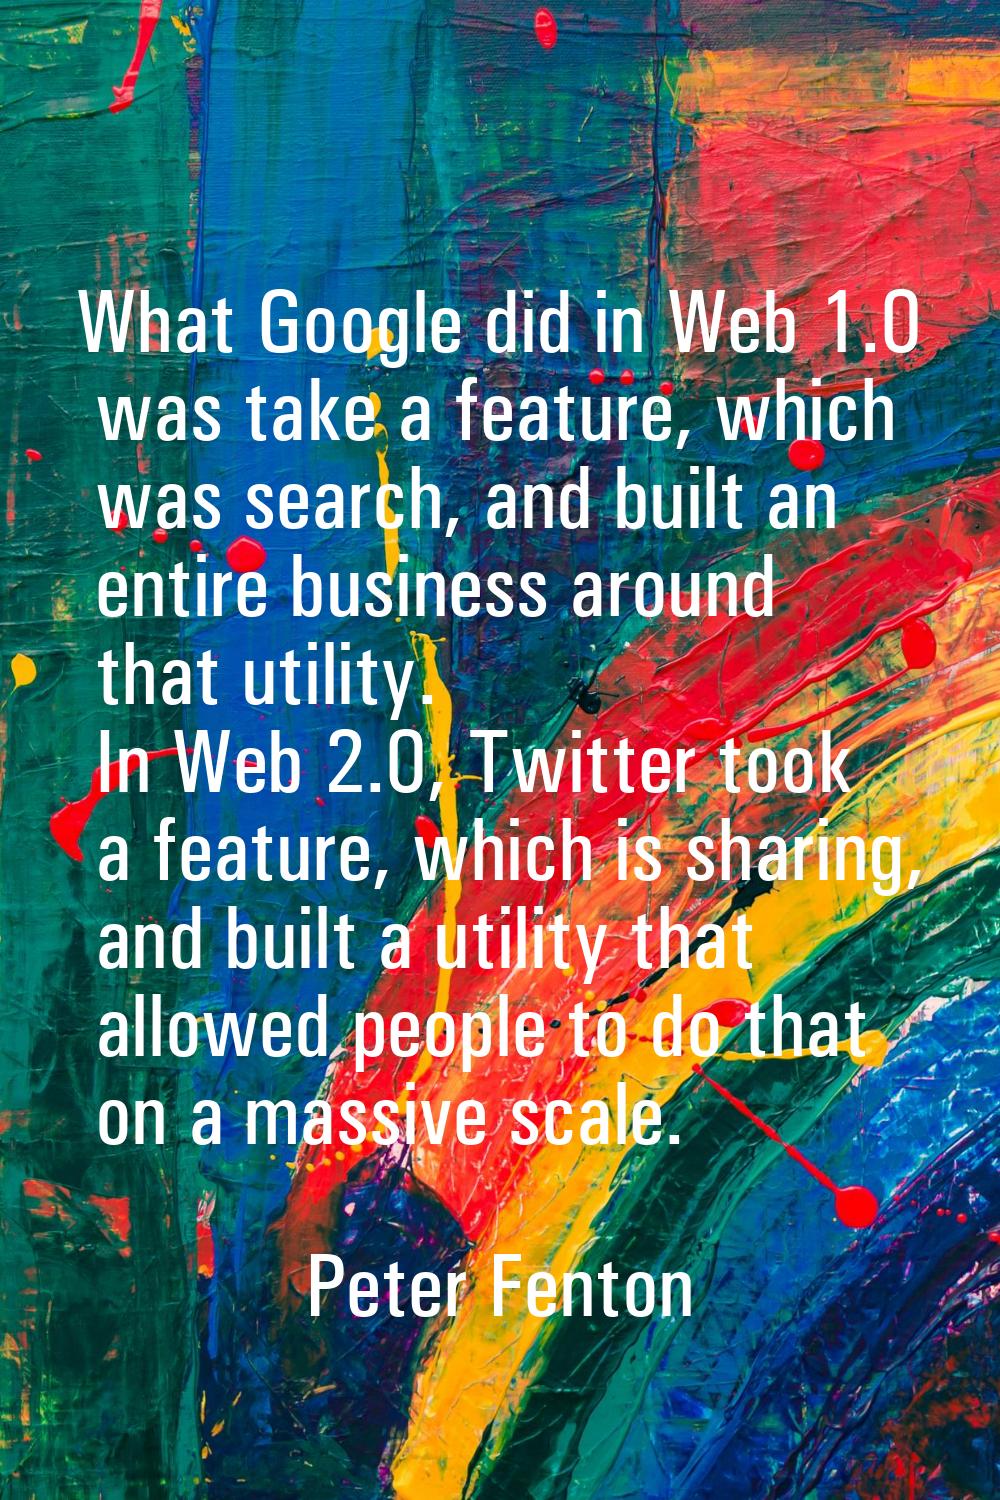 What Google did in Web 1.0 was take a feature, which was search, and built an entire business aroun